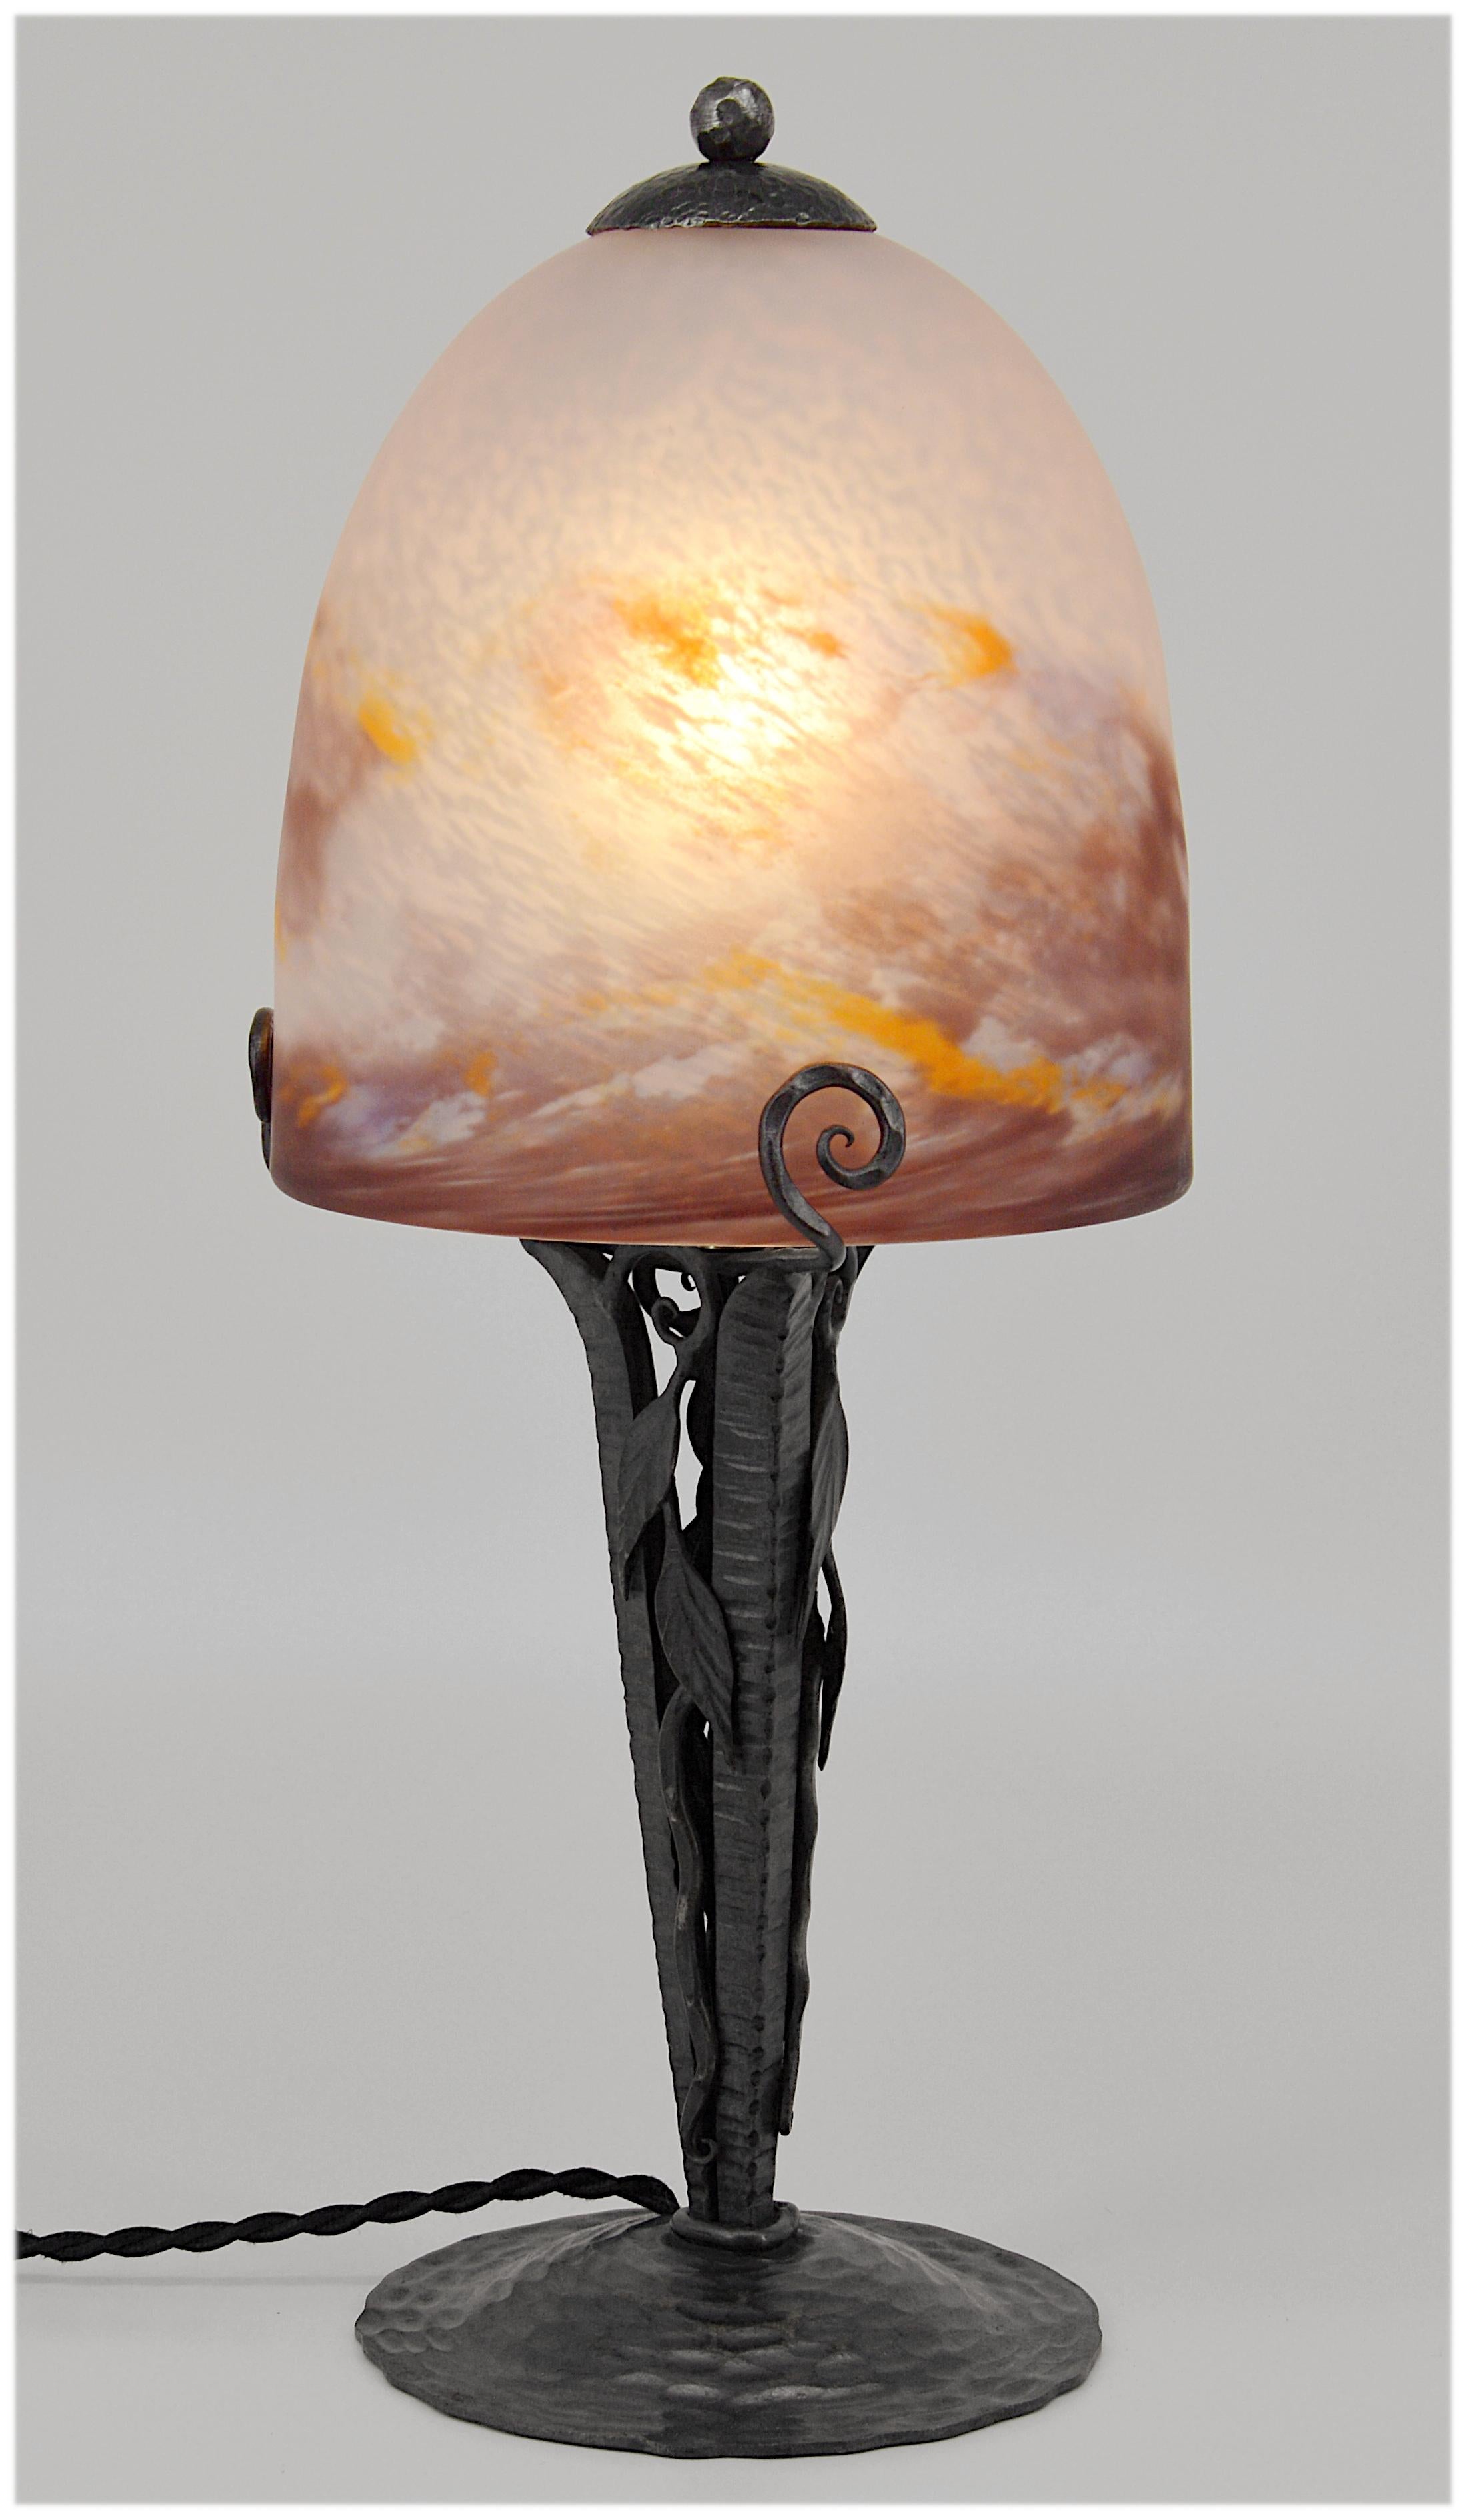 Art Deco table lamp by Degue (Compiegne), France, late 1920s. Mottled glass shade, powders are applied between two layers, that comes on its period wrought iron base. Colors: Purple, ochre and white. Measures: Height 15